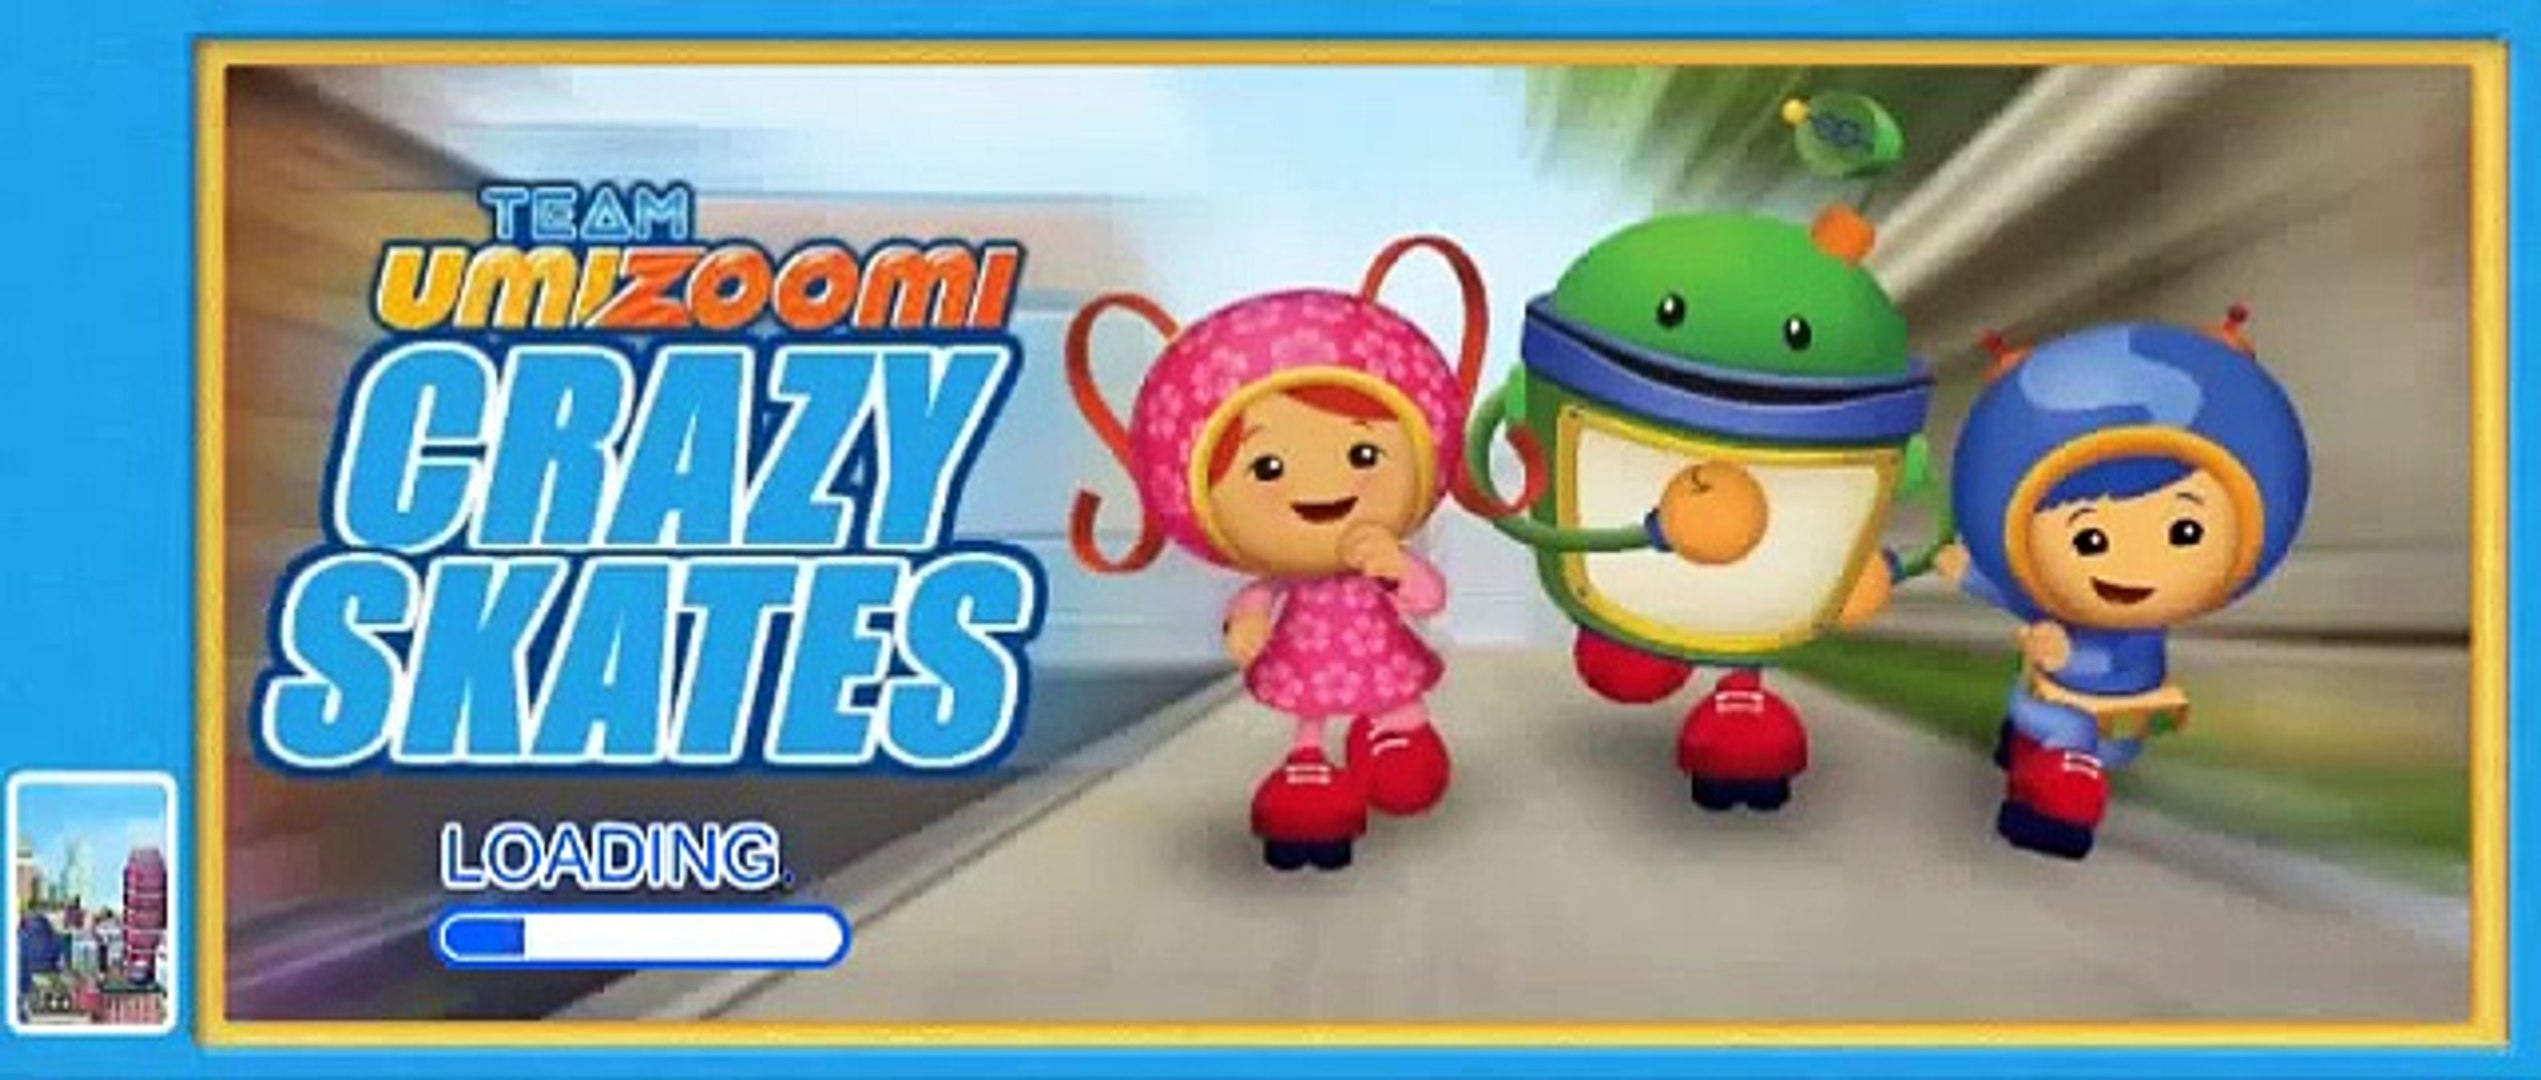 Team Umi Zoomi: Counting For Kids Team Umizoomi Cartoon Video Game Episode  - video Dailymotion